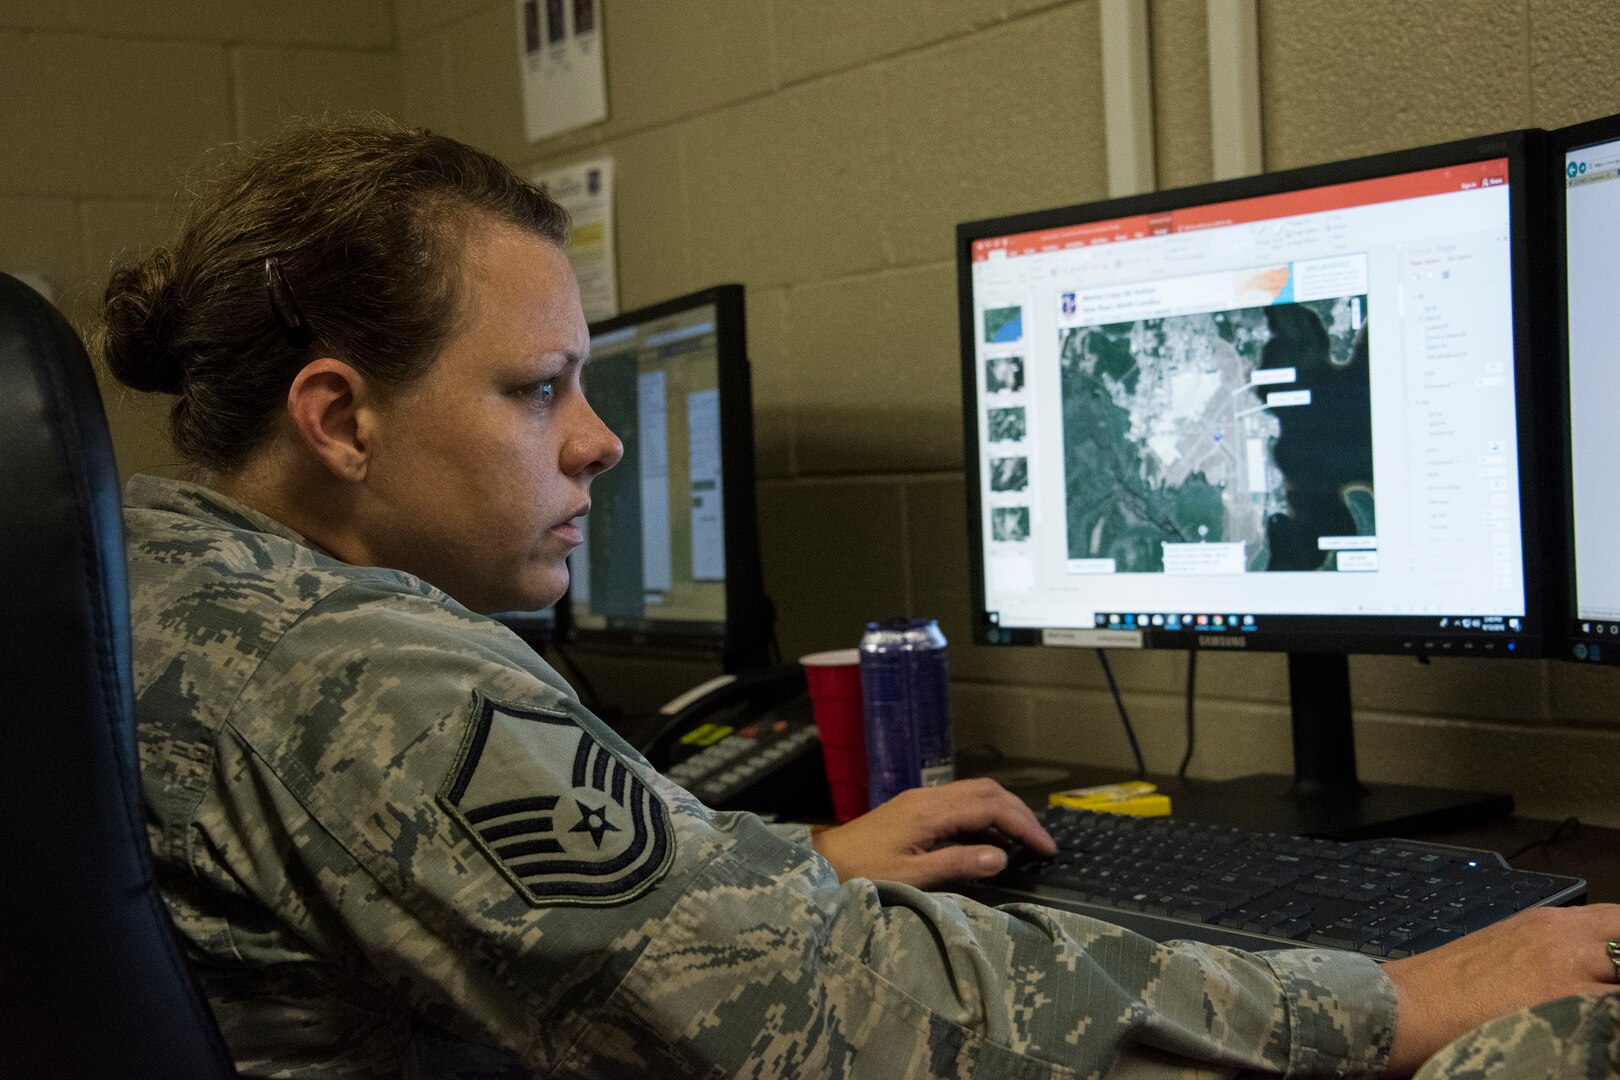 Master Sgt. Twila Costiloe, 188th Wing intelligence analyst, creates graphical information products in the 188th Unclassified Processing, Assessment, and Dissemination element at Ebbing Air National Guard Base, Ark., to support Hurricane Florence responders Sept. 13, 2018. The UPAD rapidly provides graphical information products requested by incident commanders located across the storm’s path.